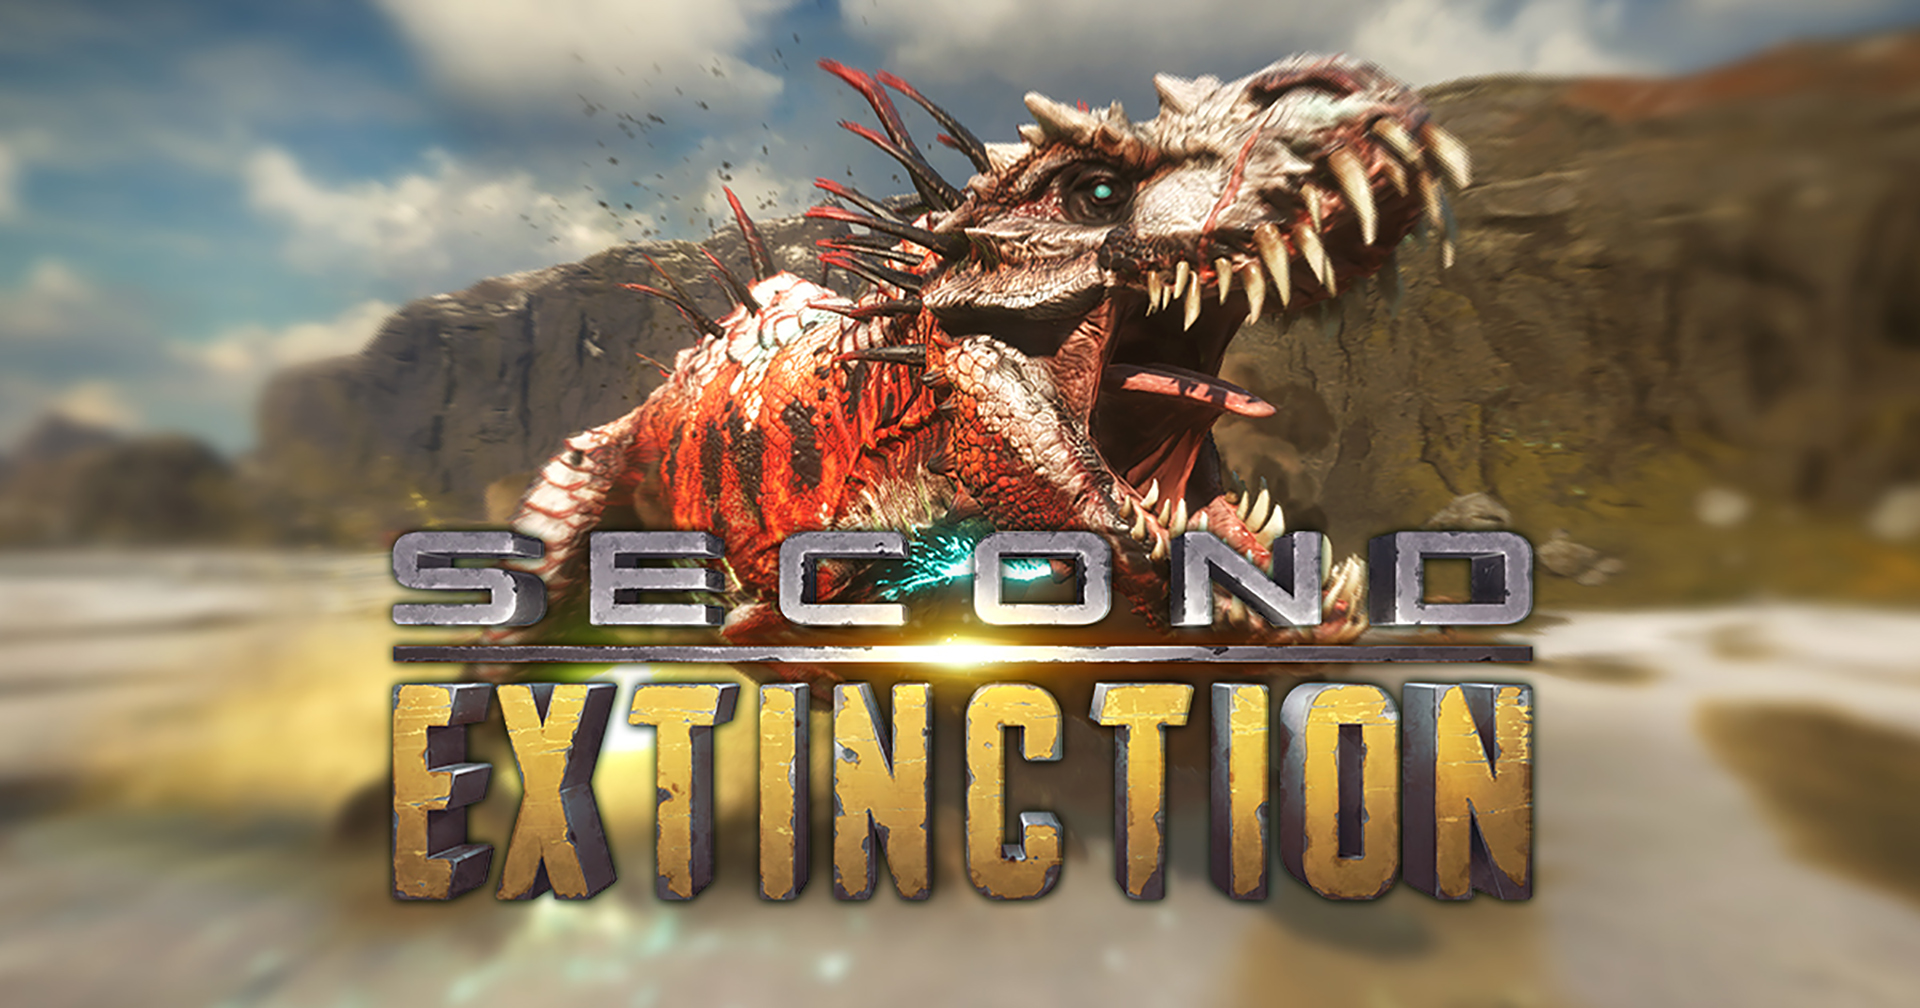 when does second extinction come out for xbox